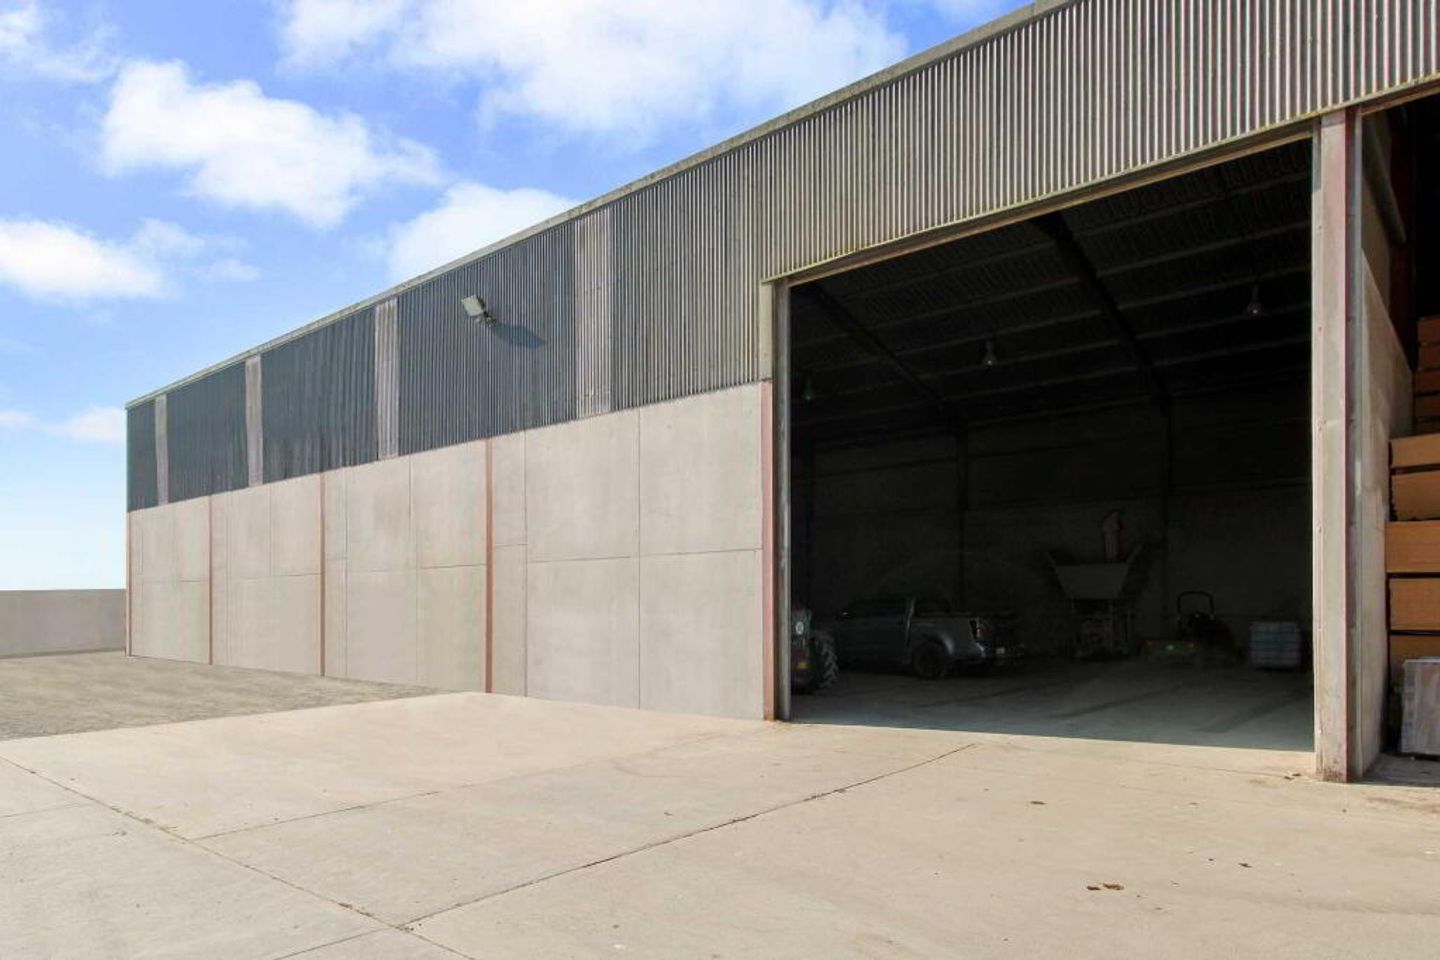 6000 Sq. Ft. Warehouse, Nenagh, Co. Tipperary